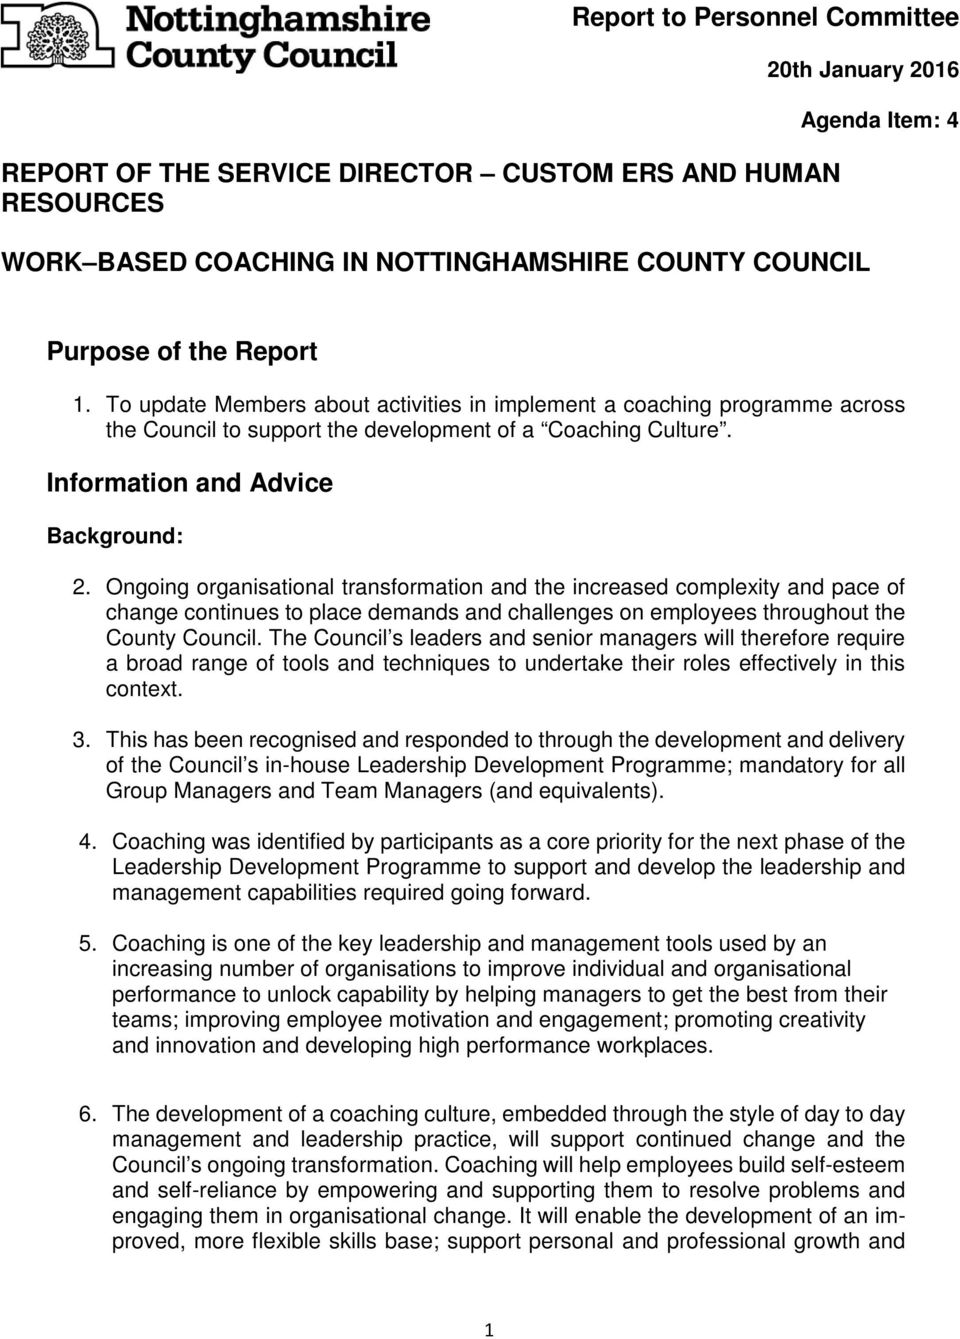 Ongoing organisational transformation and the increased complexity and pace of change continues to place demands and challenges on employees throughout the County Council.